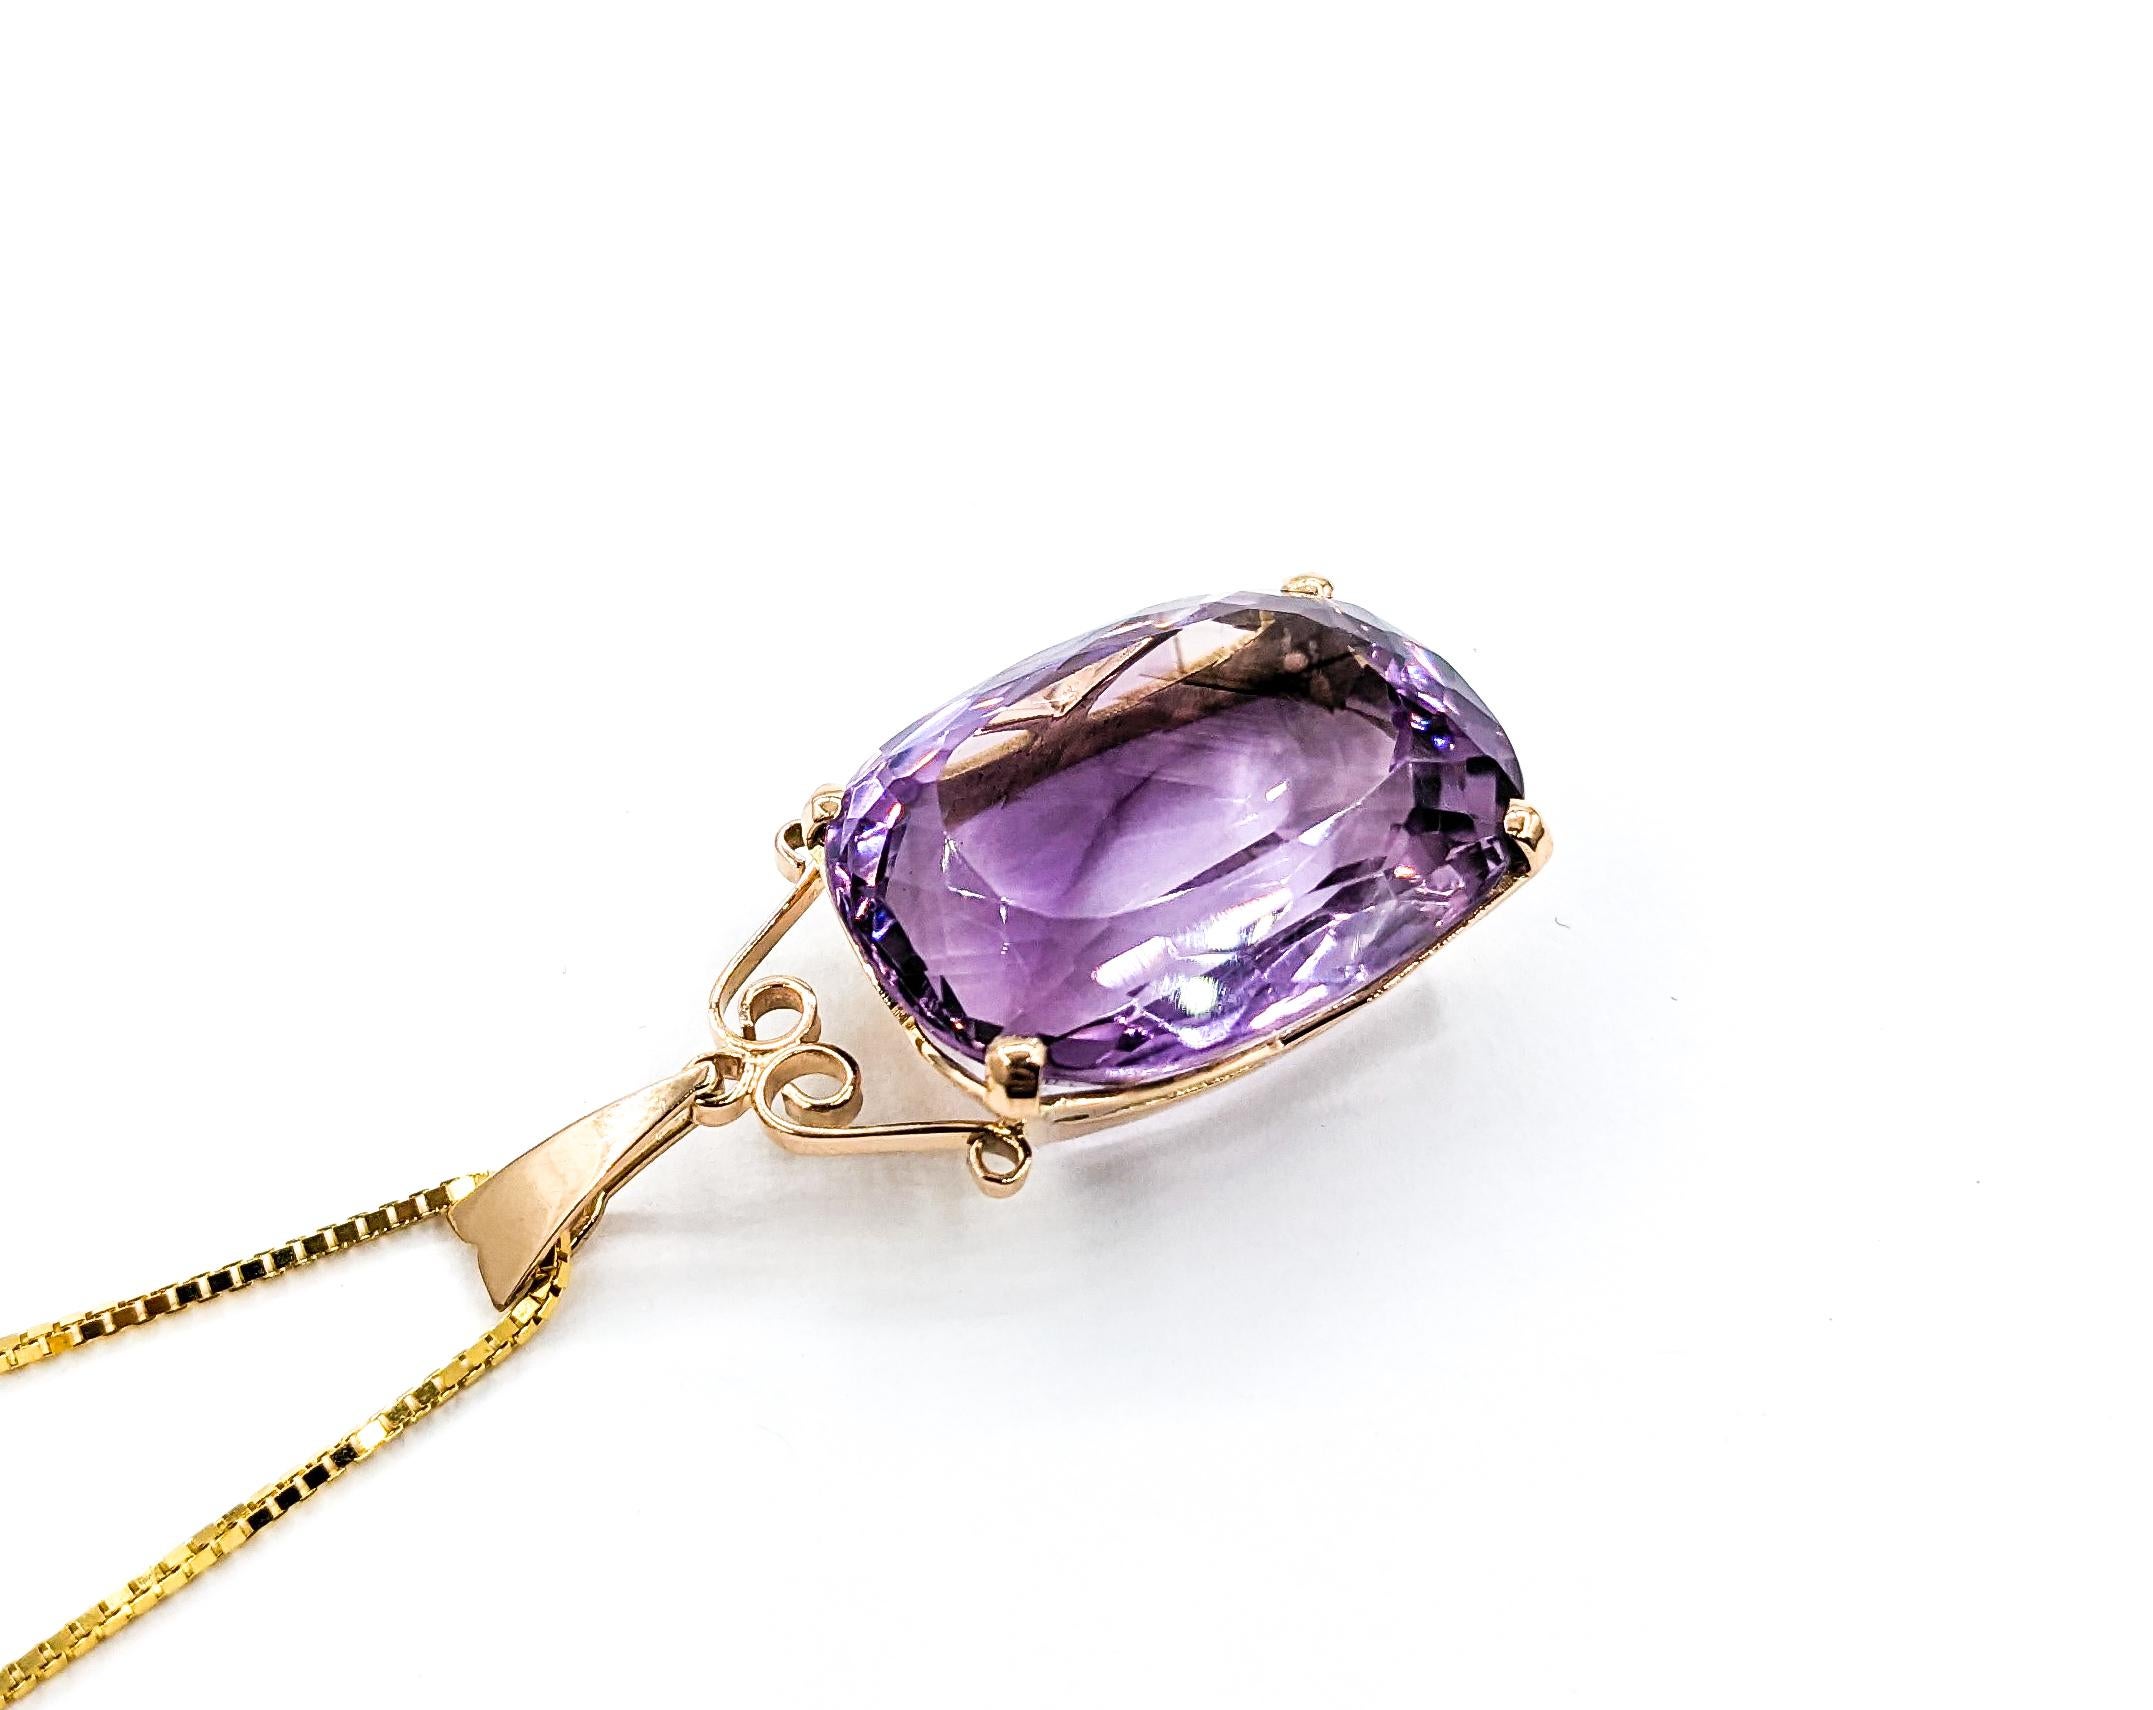 46ct Amethyst Pendant With Chain In Yellow Gold For Sale 1